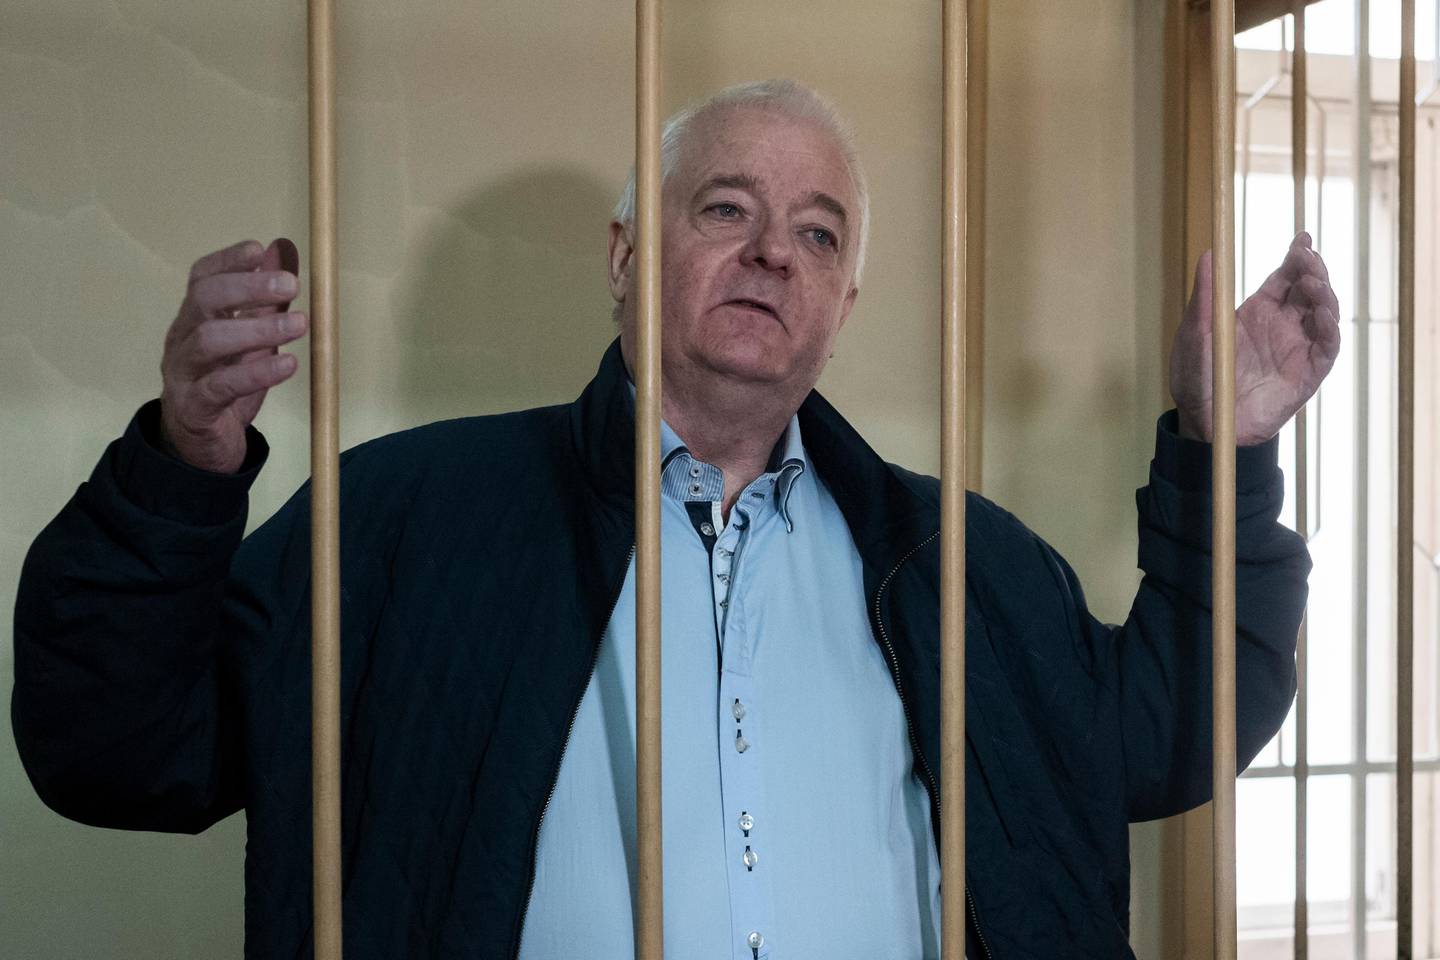 Norwegian national Frode Berg, who is accused of spying on Russia, stands in a cage in Lefortovo district court in Moscow, Russia, Monday, Oct. 1, 2018. Berg has been in custody since his arrest in December 2017 in Moscow. His lawyer believes the best opportunity now is prisoner exchange. (AP Photo/Alexander Zemlianichenko)